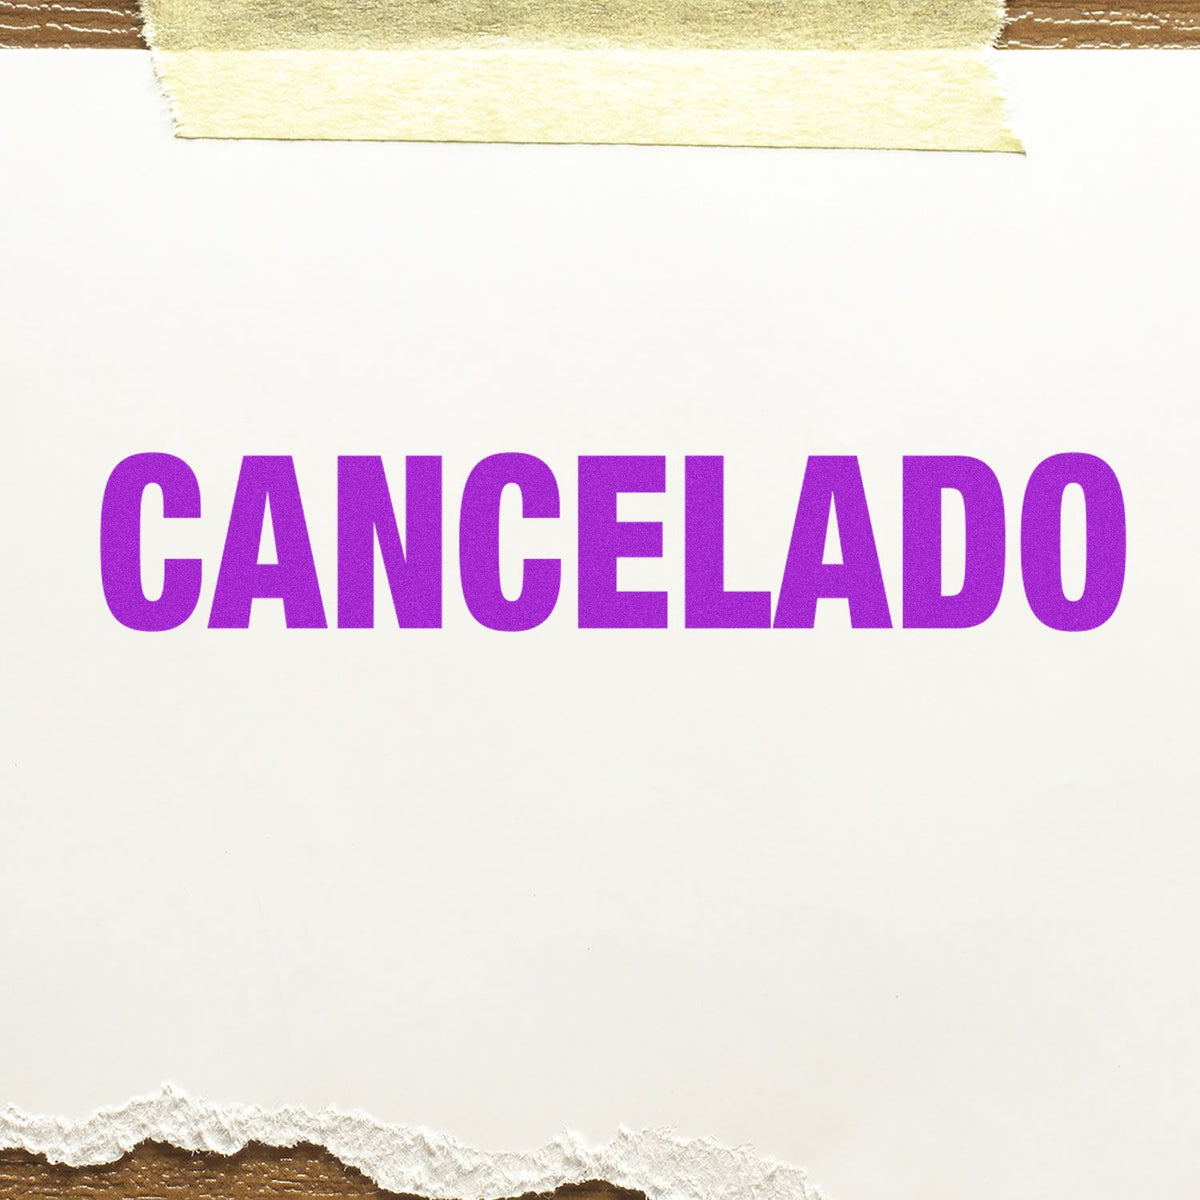 Large Cancelado Rubber Stamp In Use